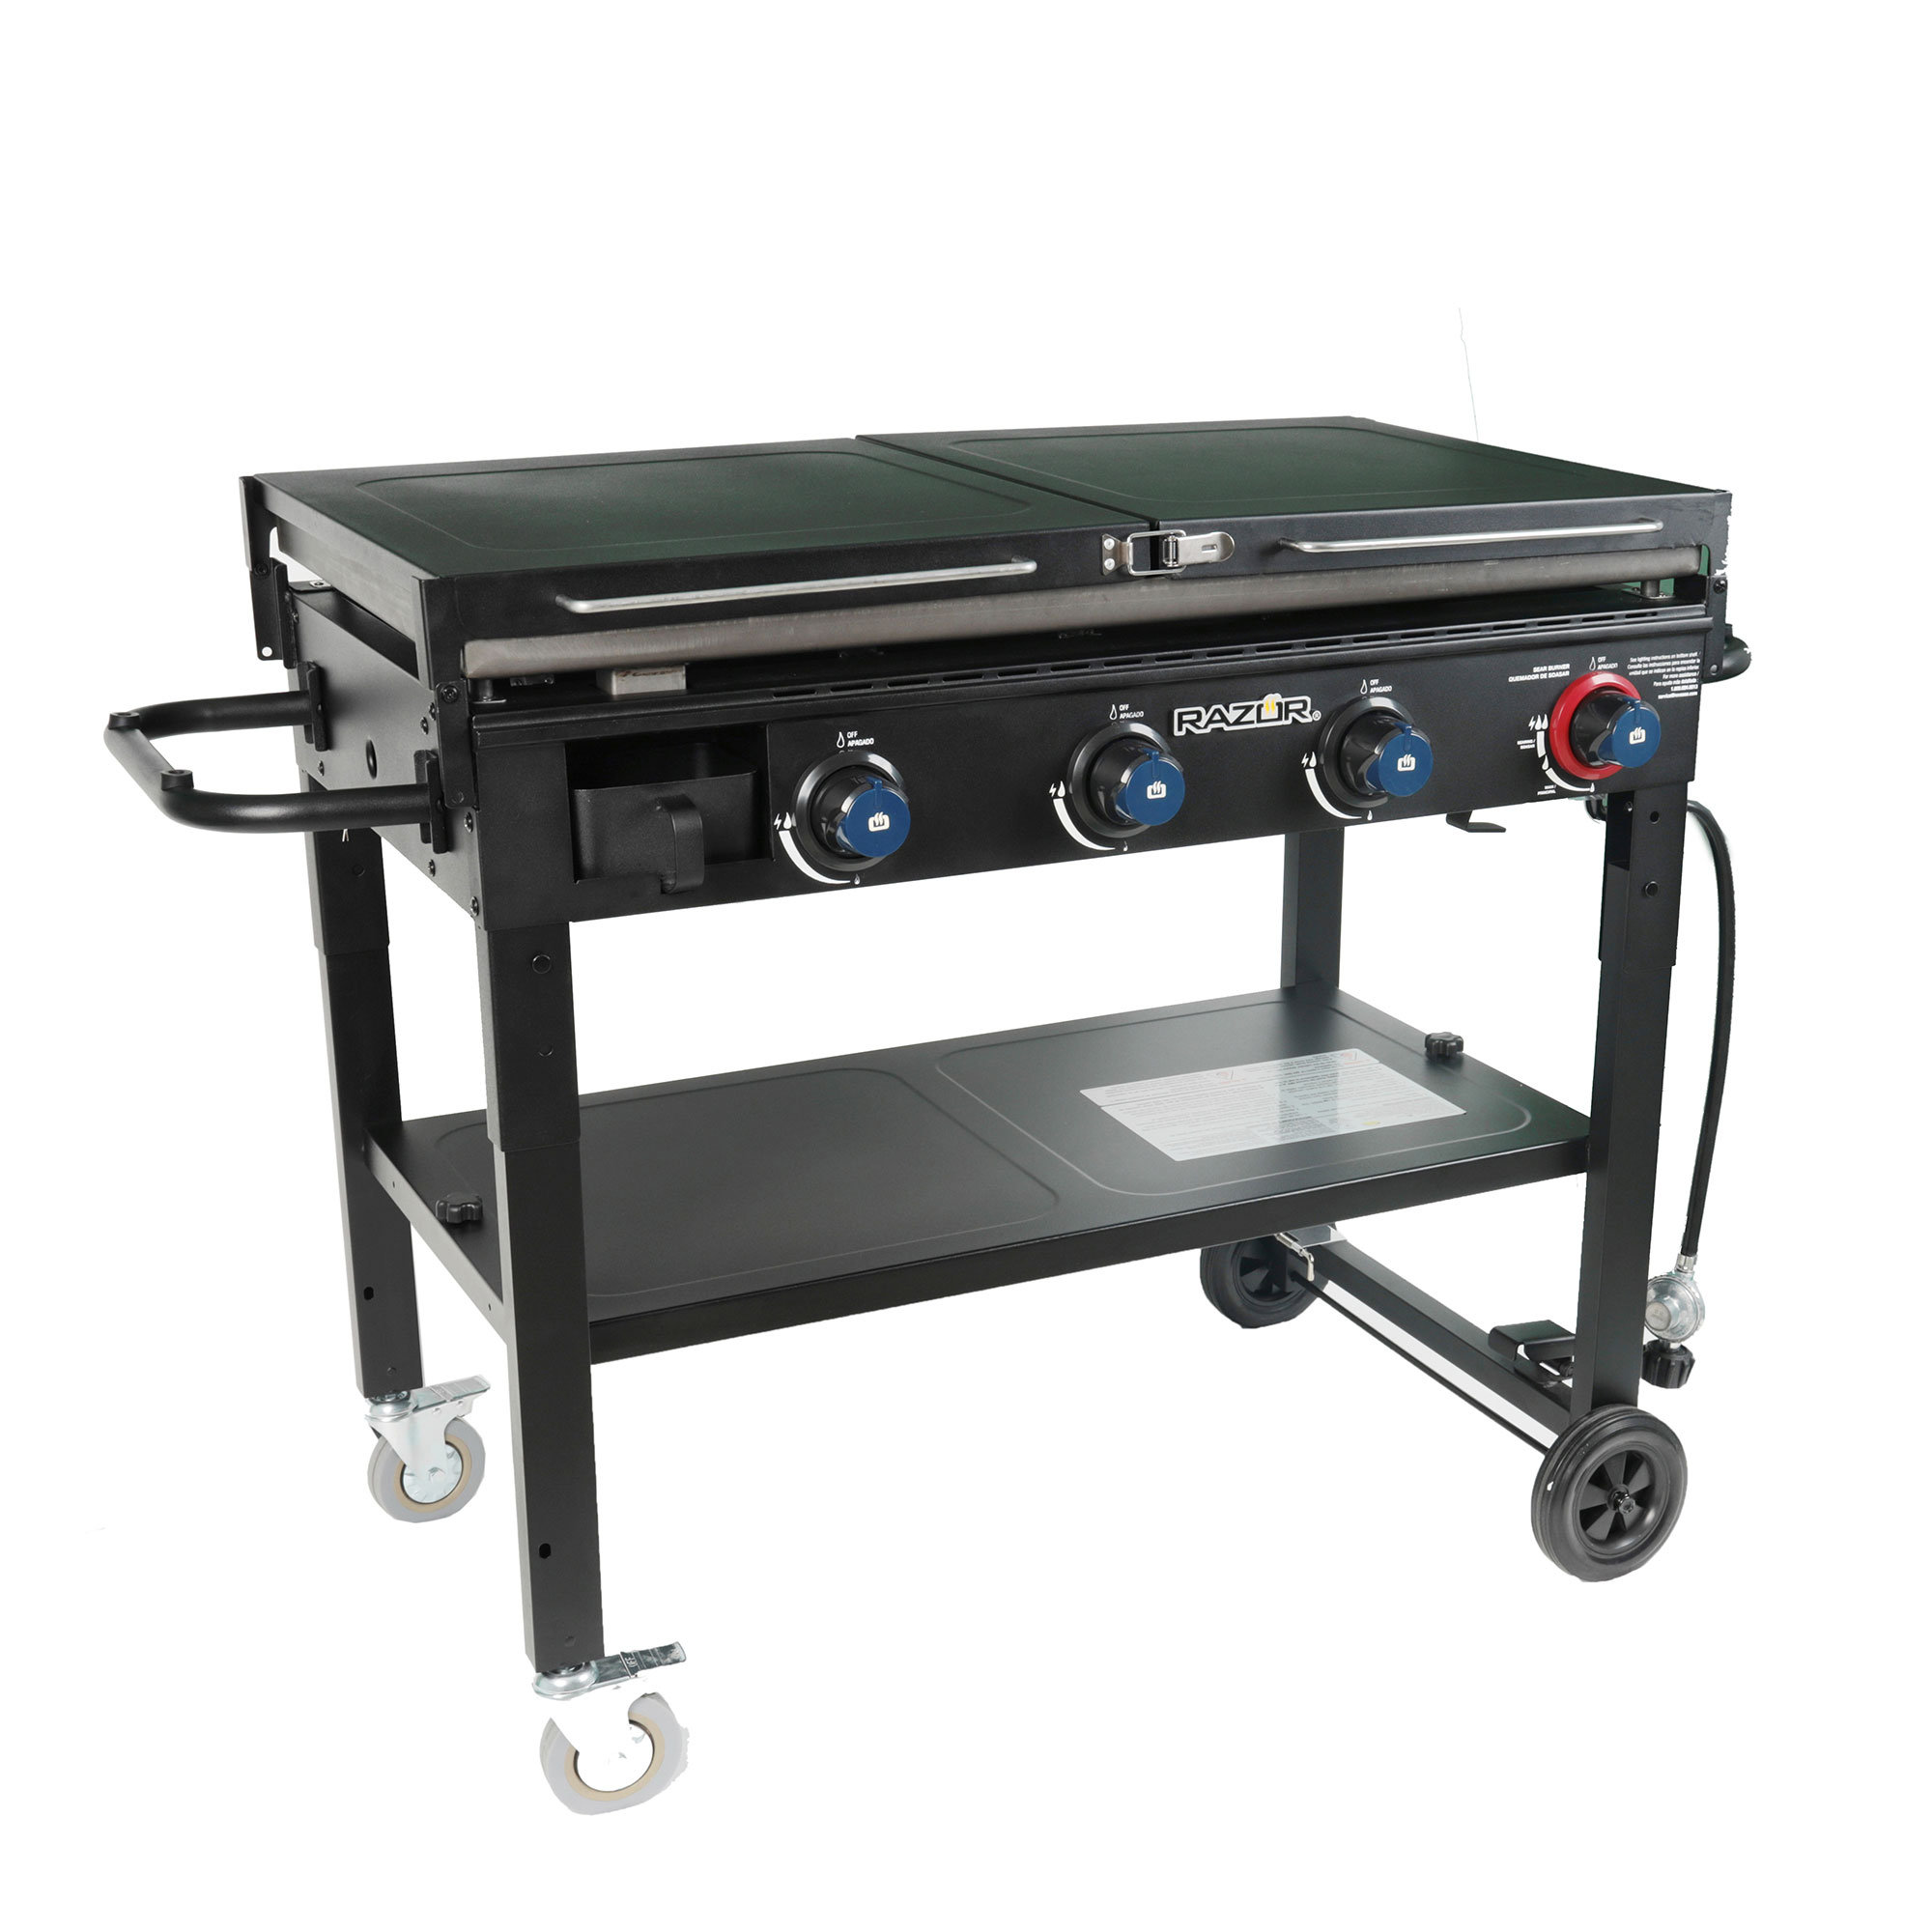 24 LP Propane Flat Top Griddle Commercial Flat Grill 